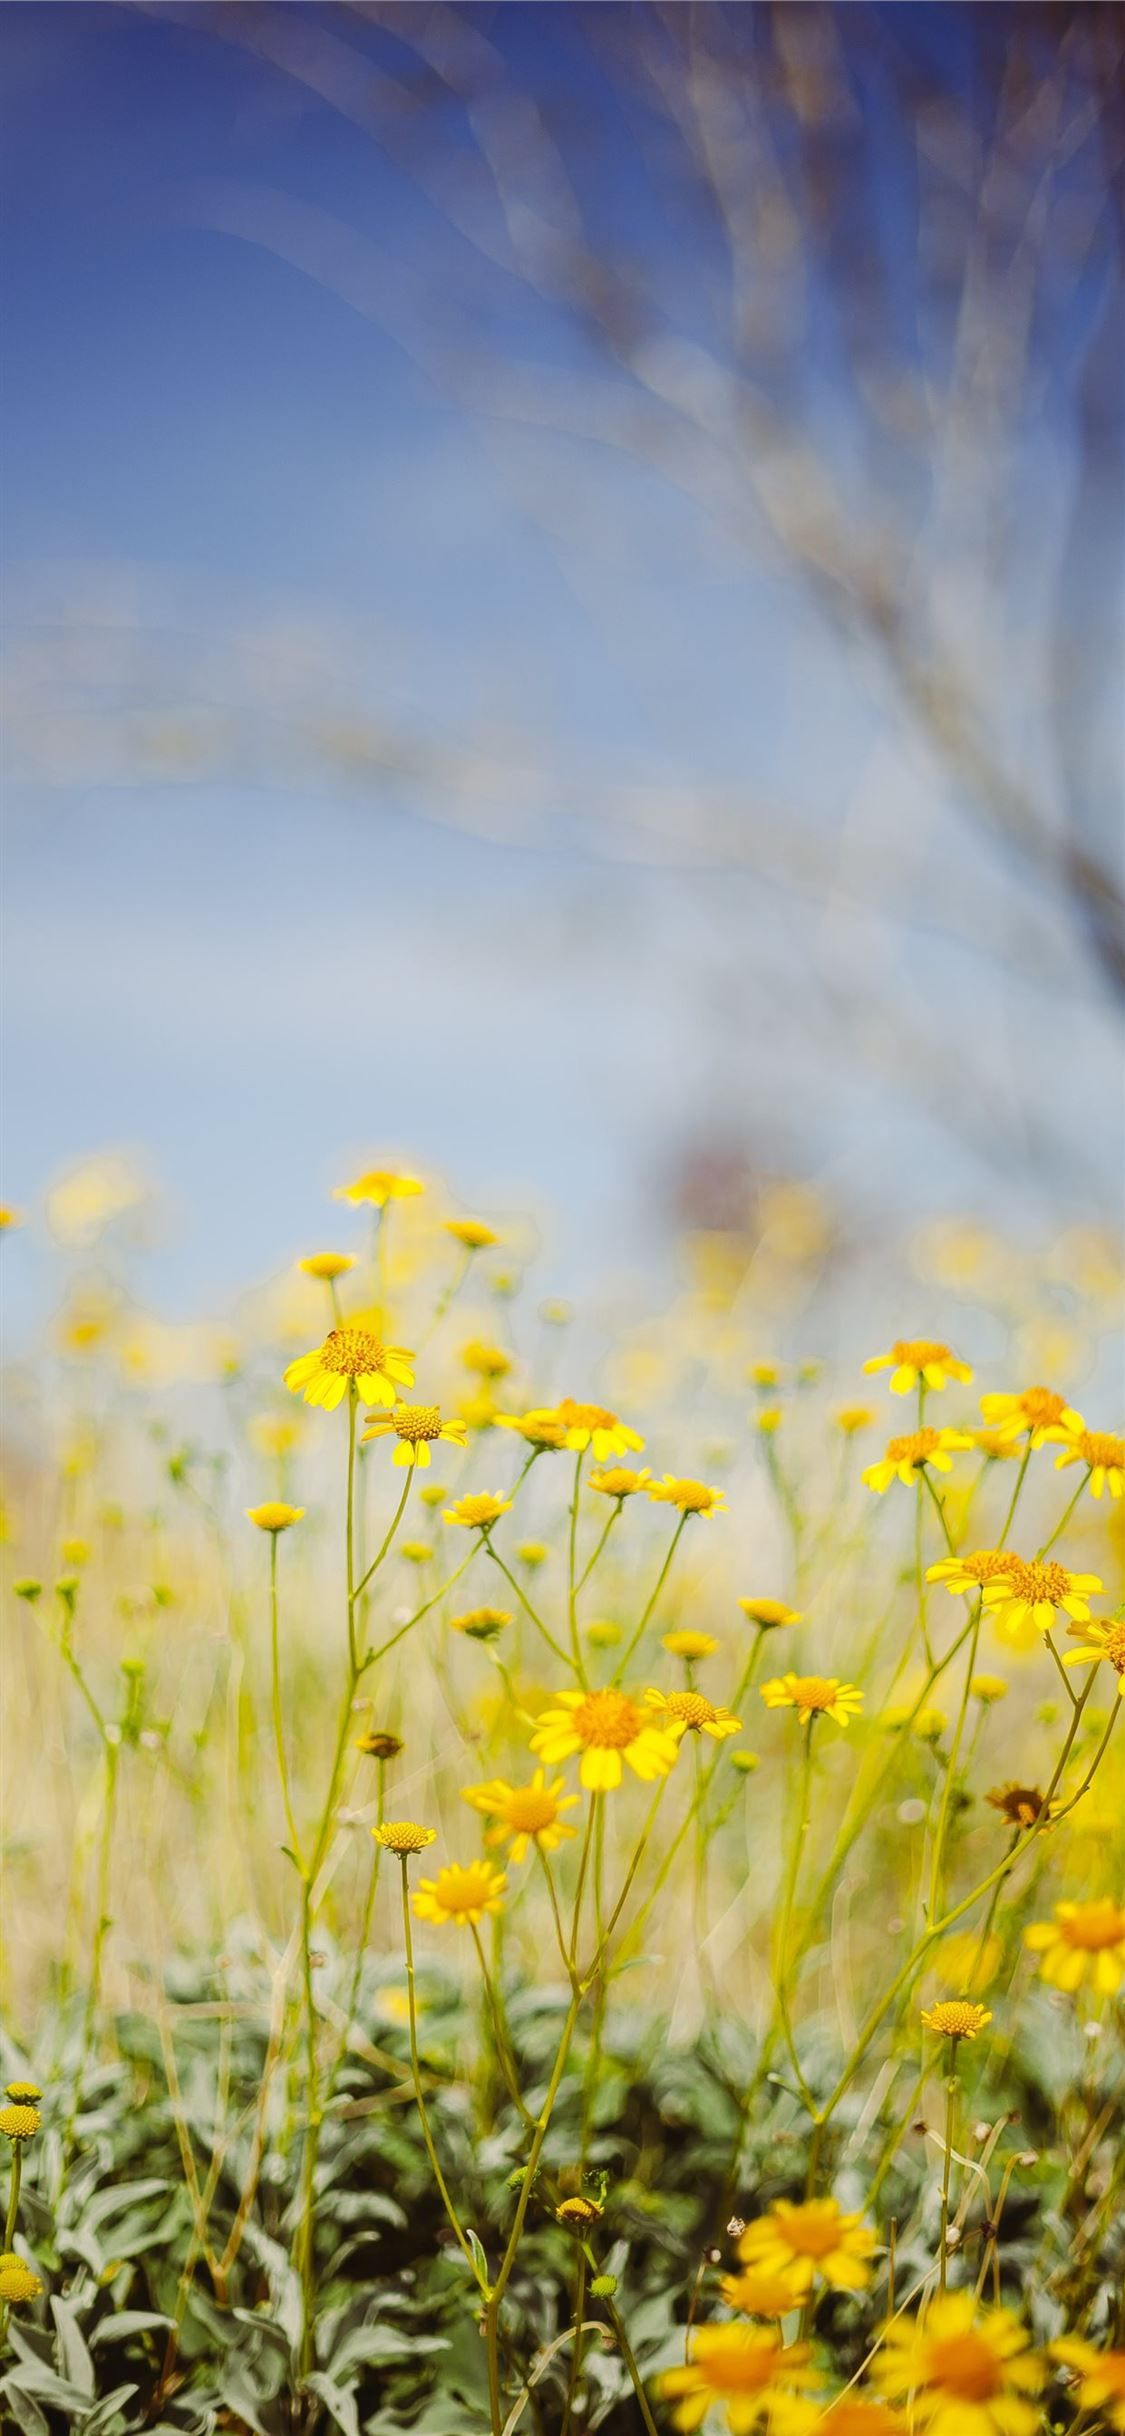 yellow flower field under blue sky during daytime iPhone 11 Wallpaper Free Download